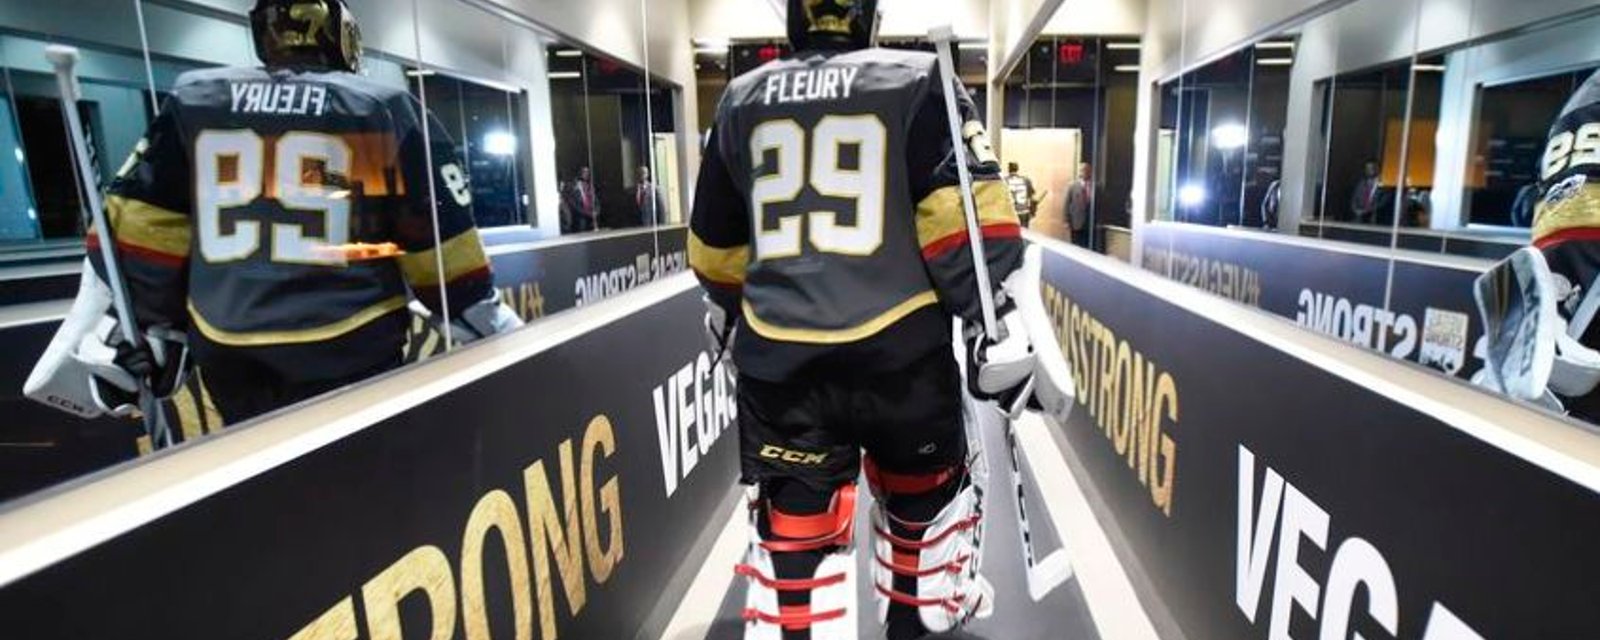 Golden Knights reveal why Fleury has left the team indefinitely